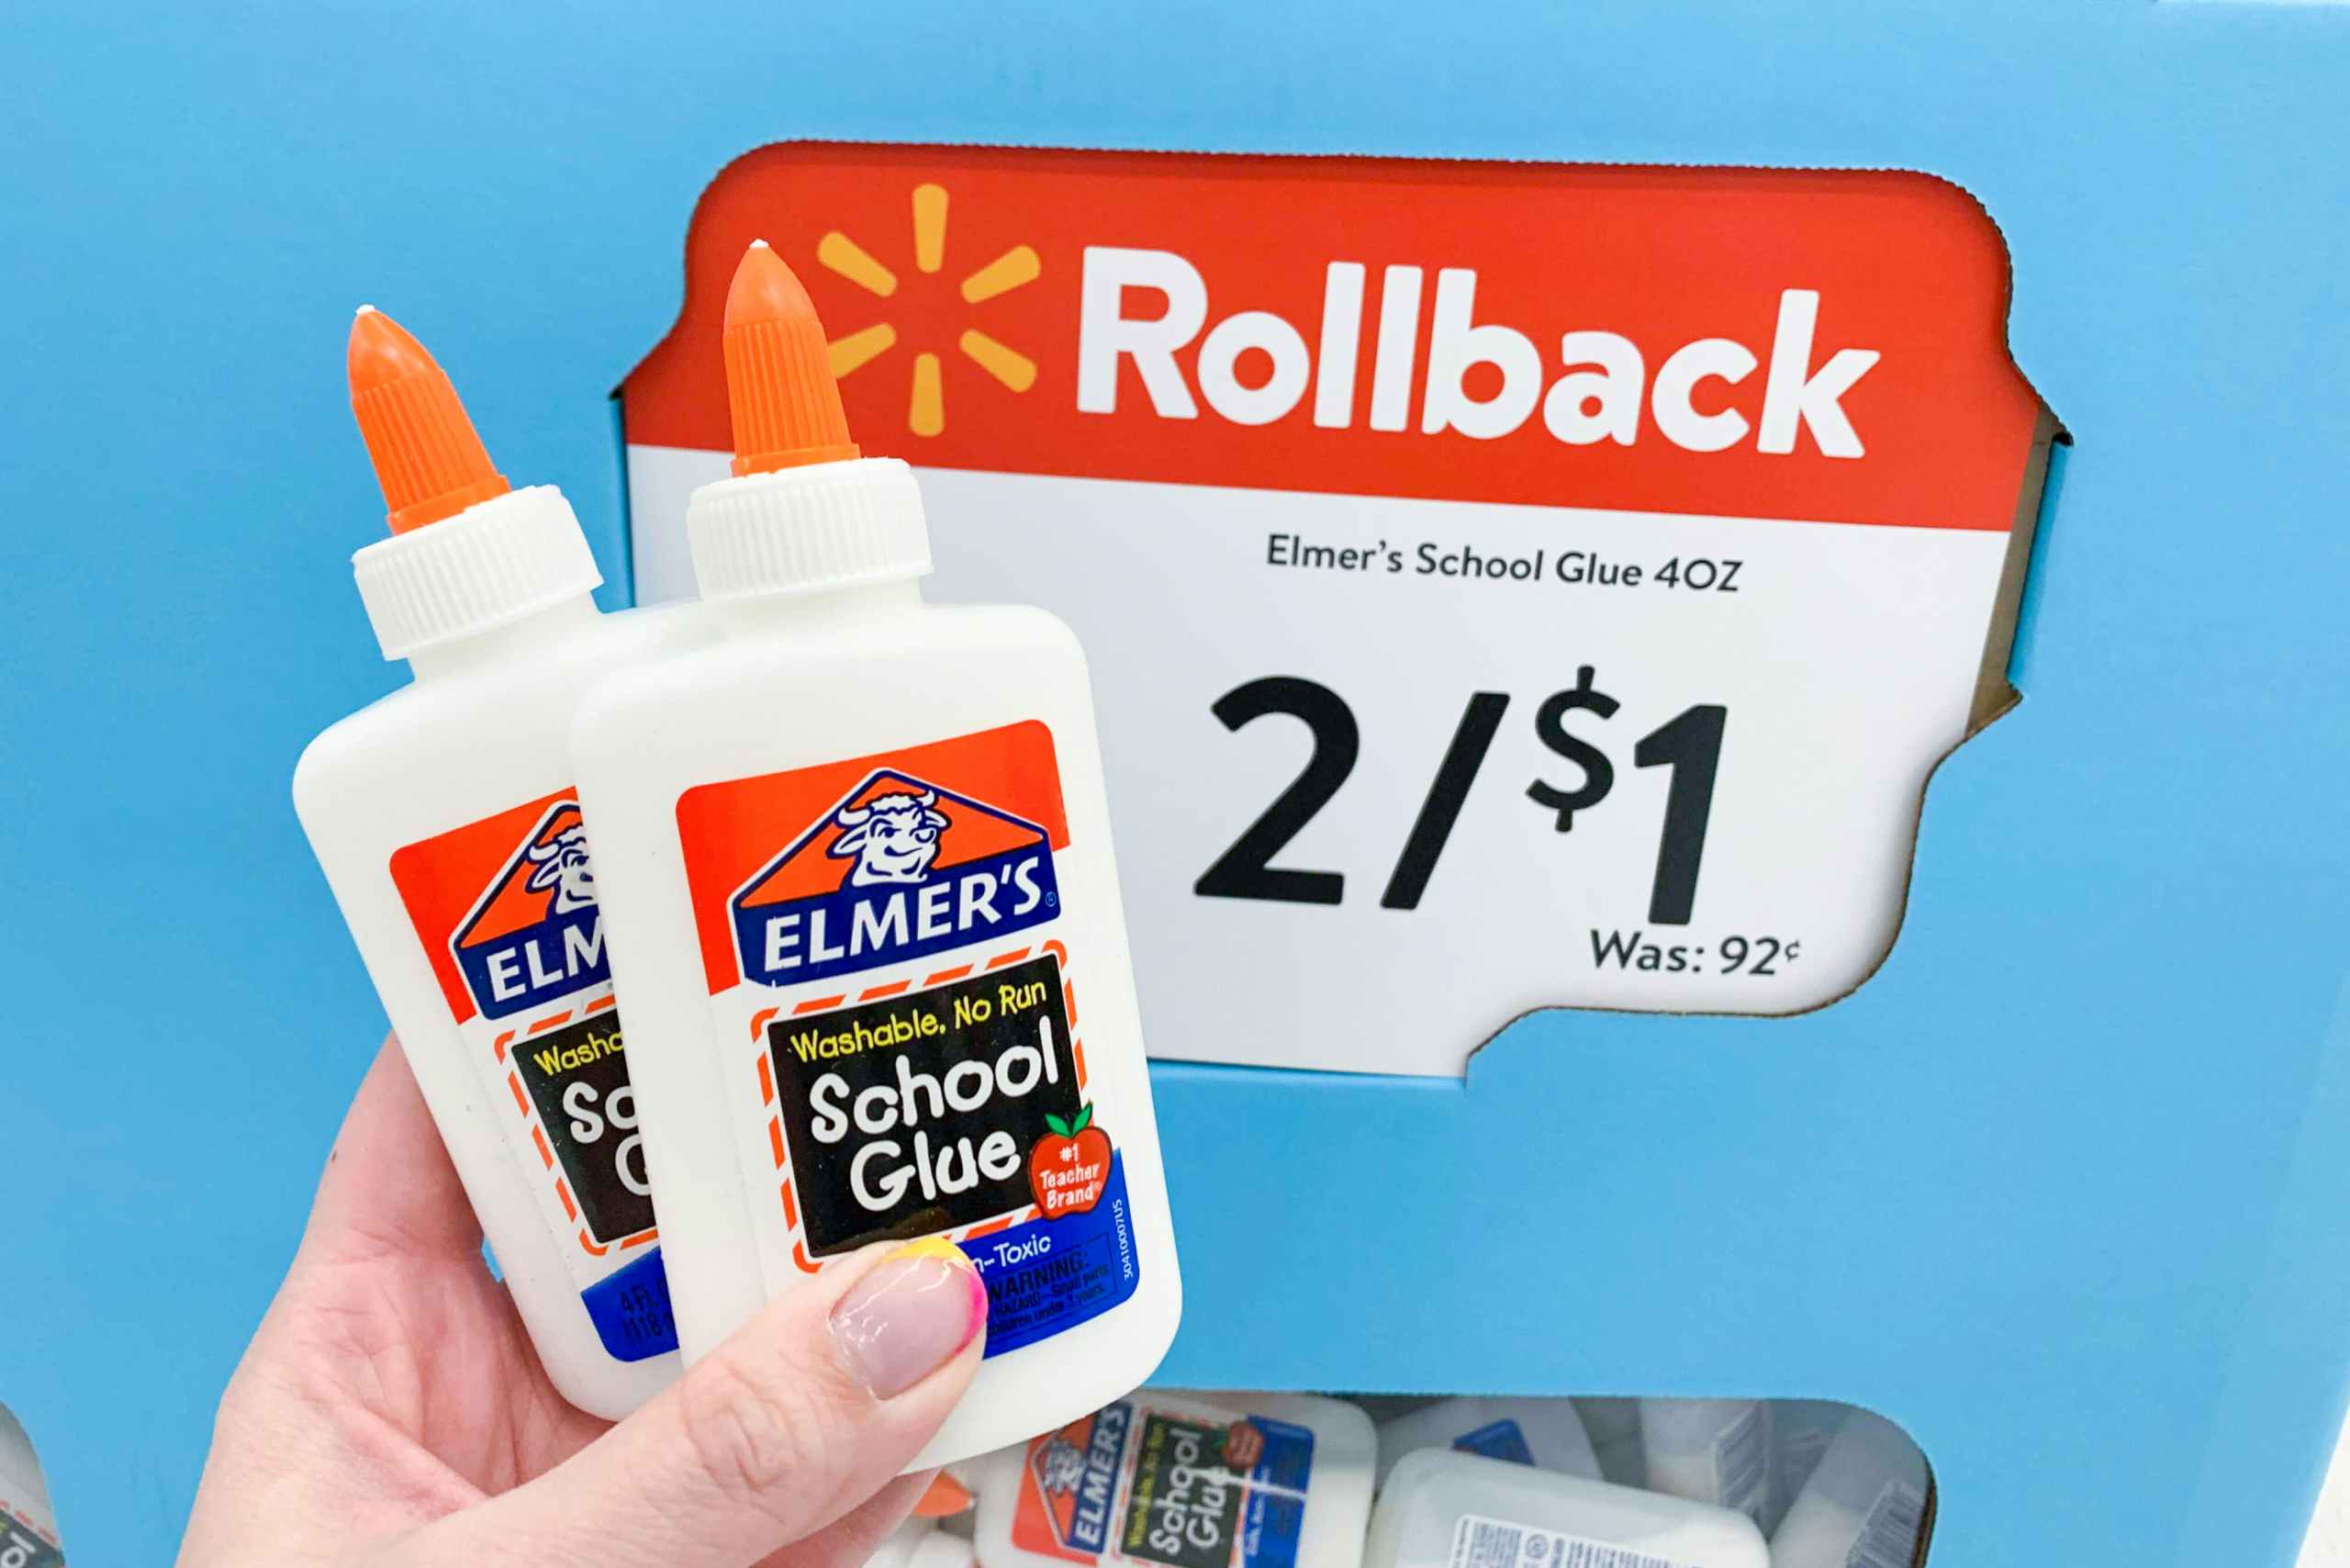 A person's hand holding 2 bottles of Elmer's School Glue in front of a Walmart Rollback sale sign that reads, "Elmer's school glue 4oz, 2/$1" inside Walmart.